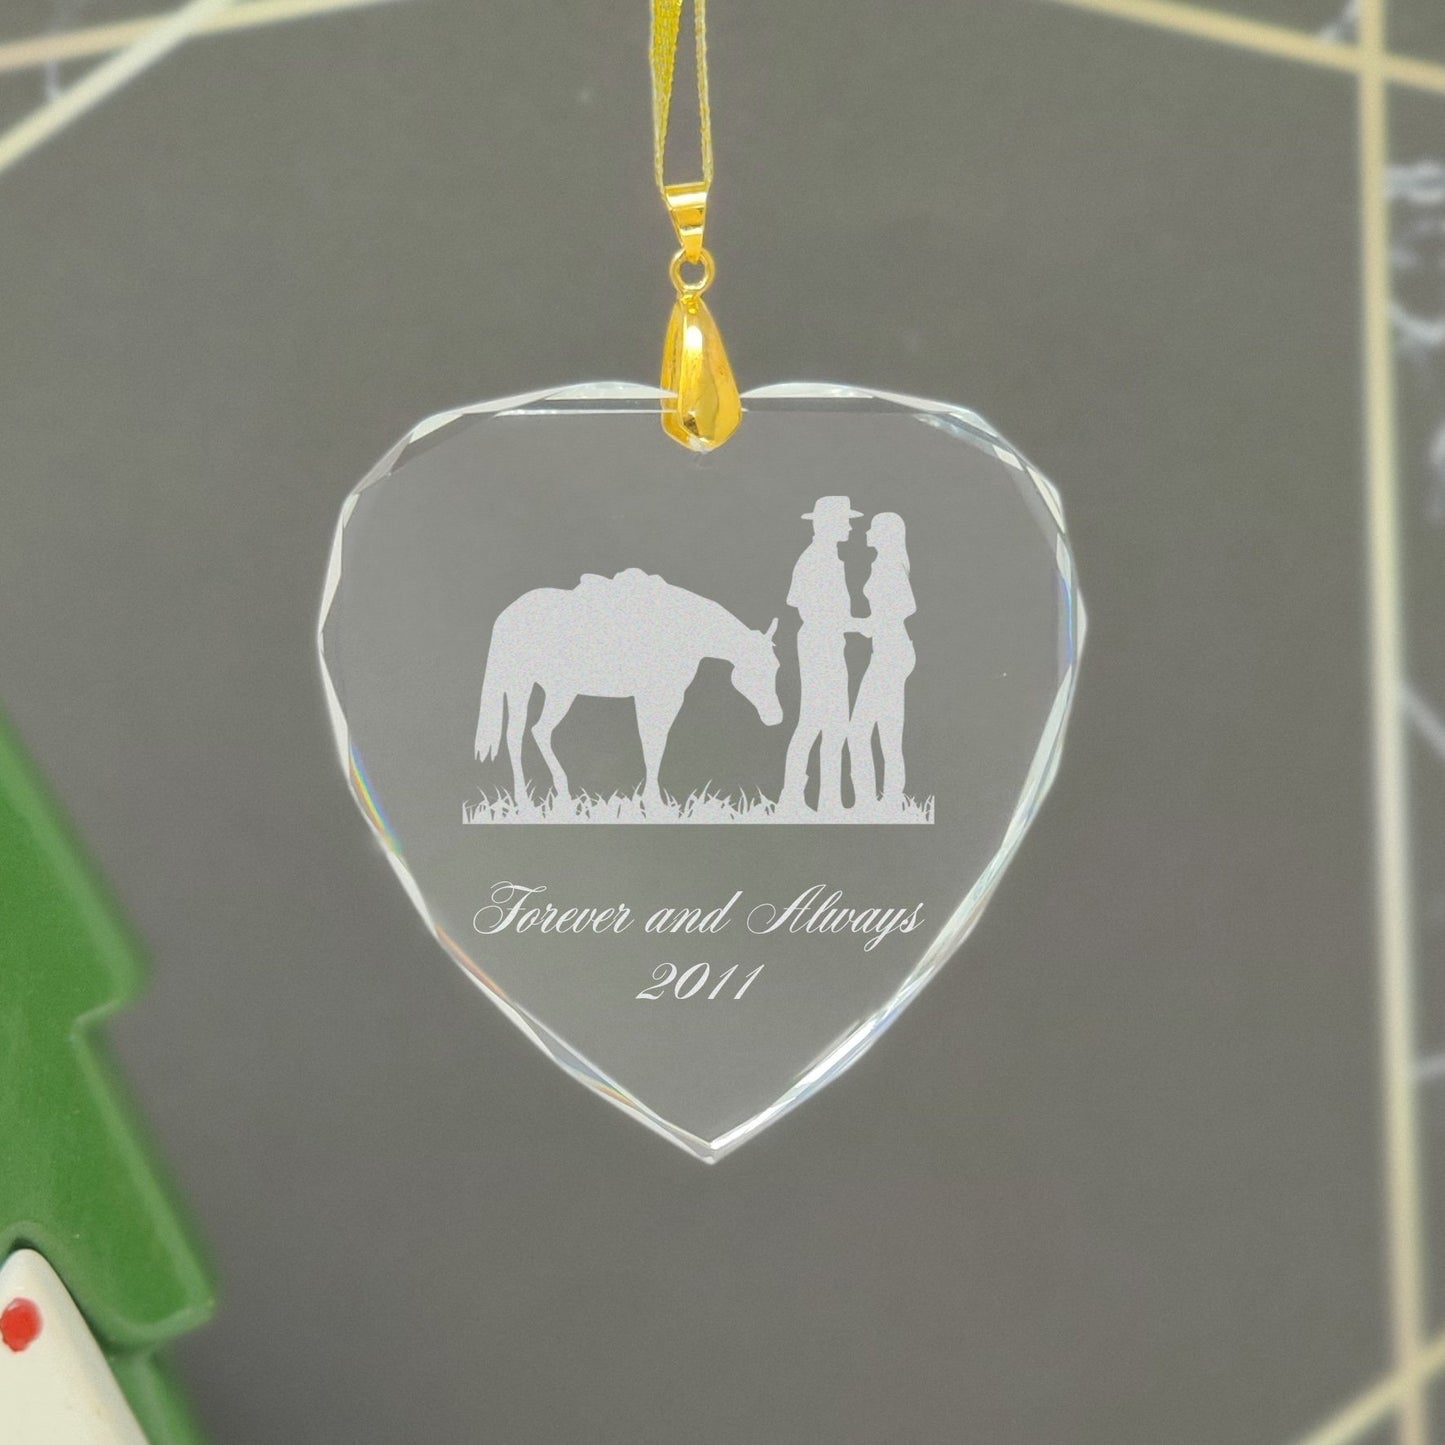 LaserGram Christmas Ornament, Seahorse, Personalized Engraving Included (Heart Shape)